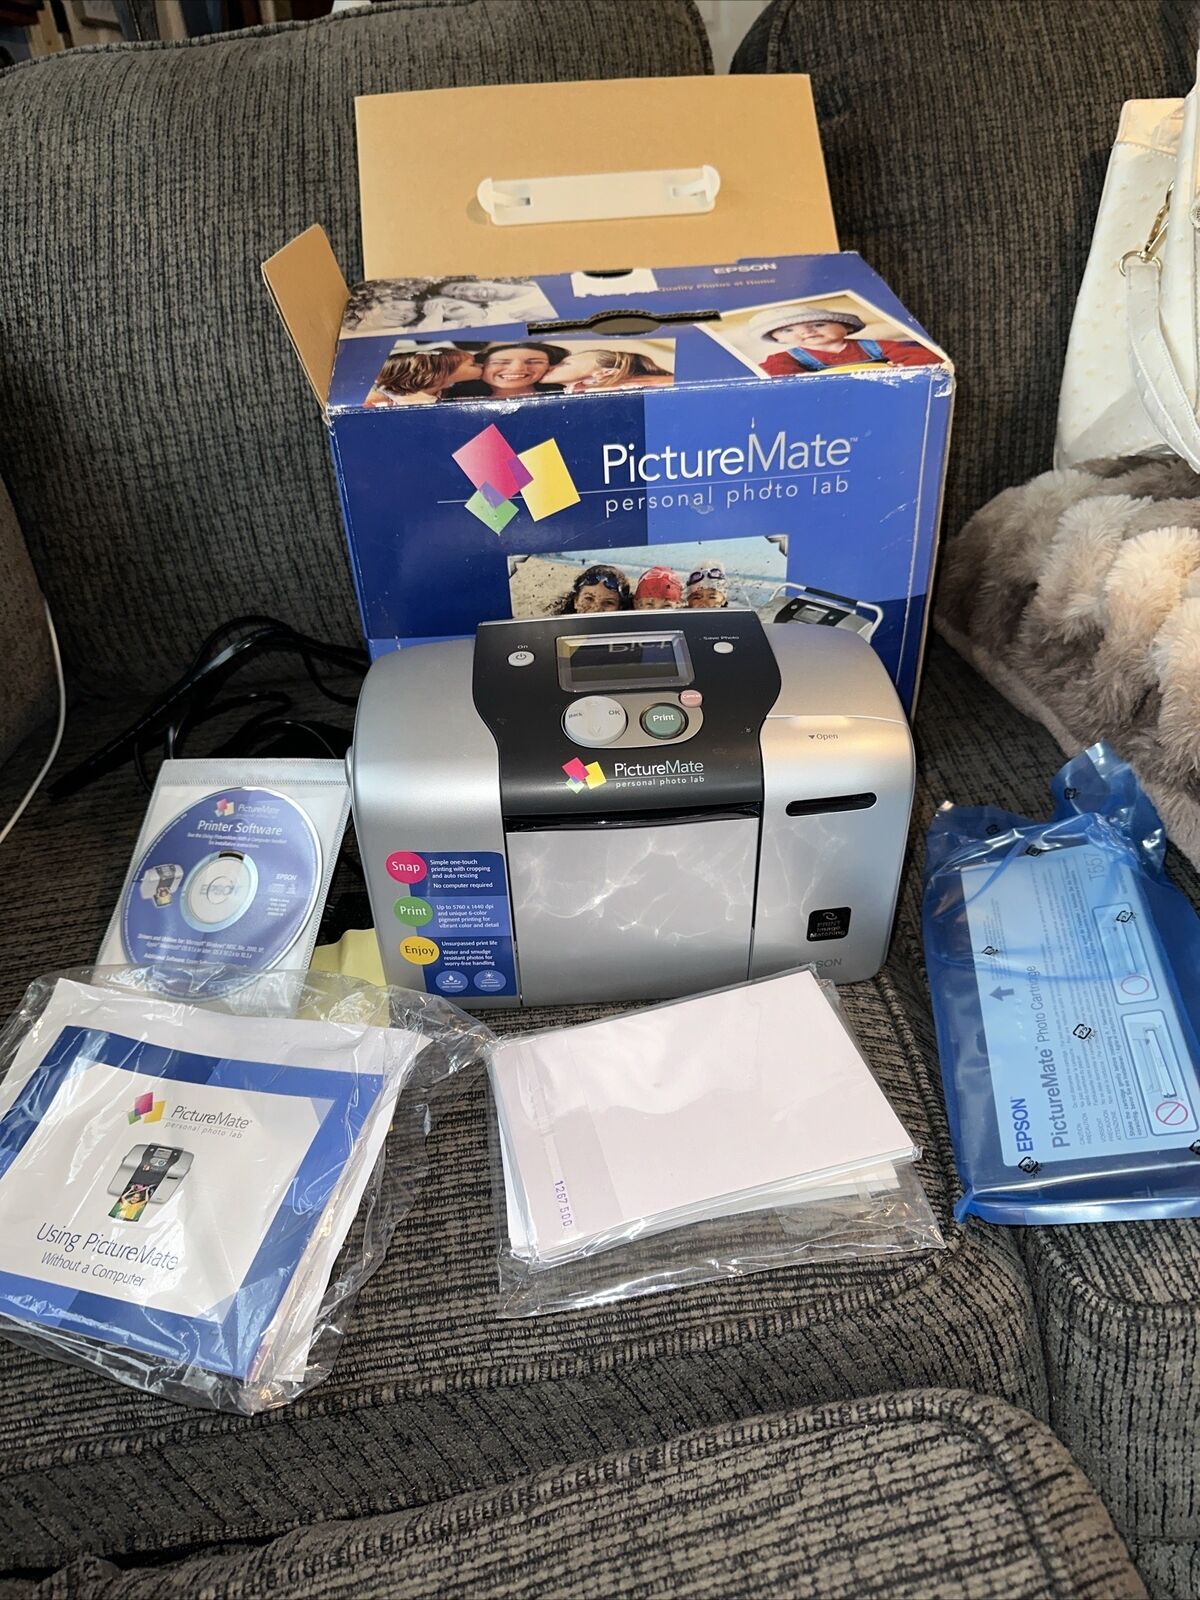 Epson PictureMate Express Edition Personal Photo Lab Printer - B271A